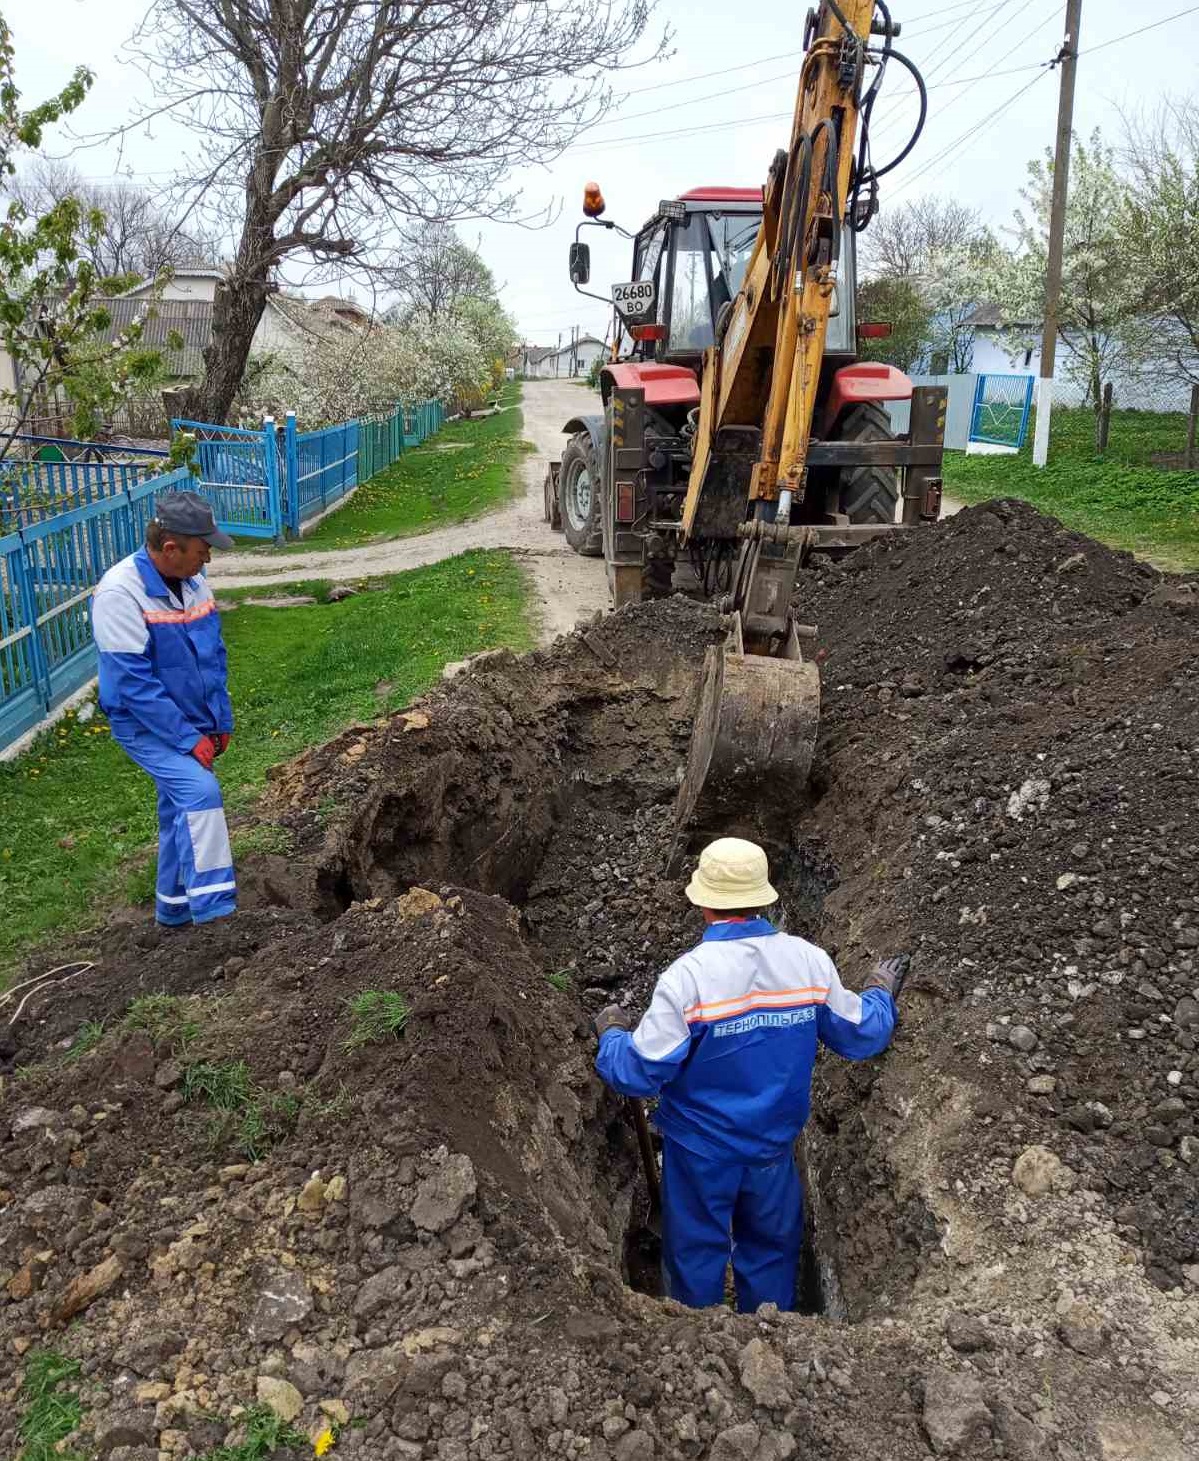 Repair works on the low-pressure gas pipeline in the village Yastrubove has been completed